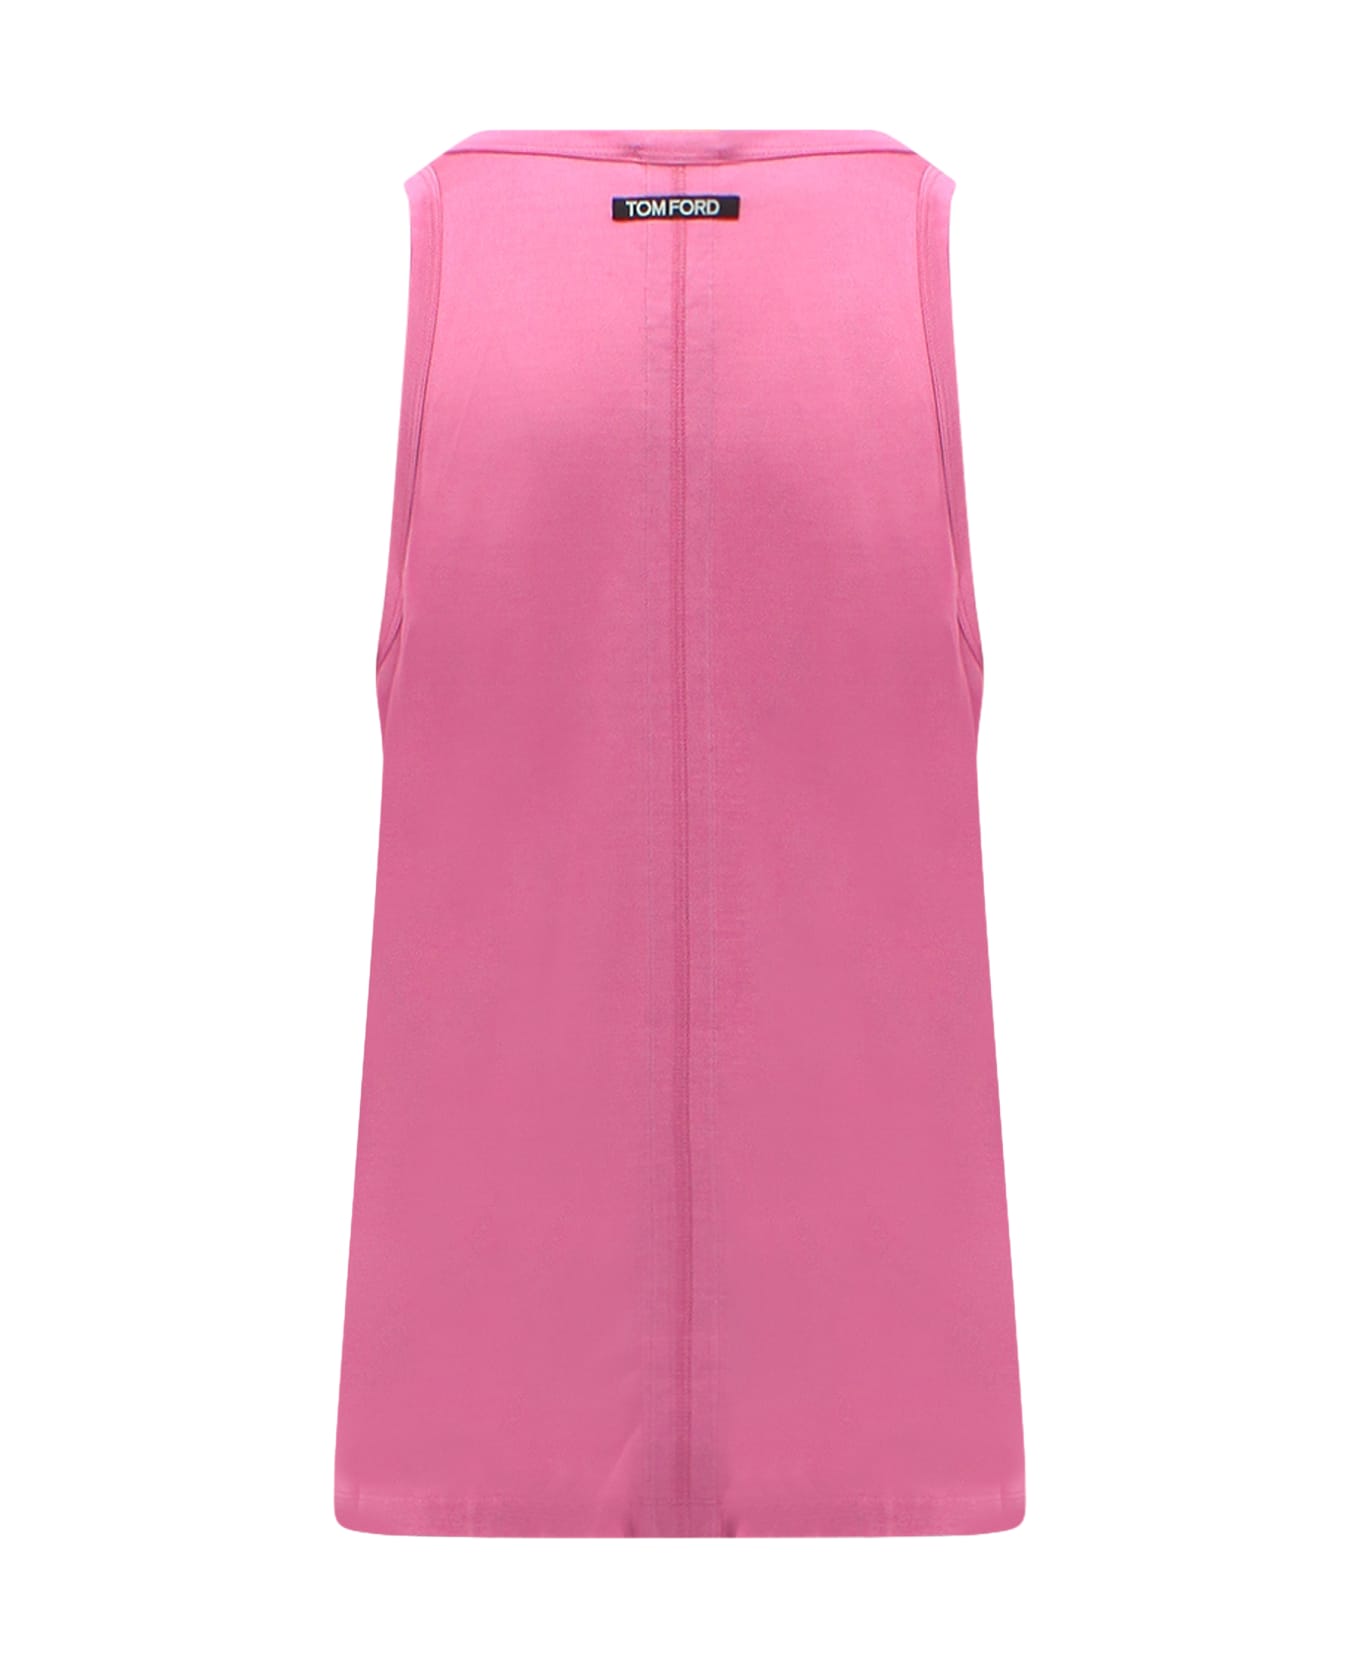 Tom Ford Tank Top - Pink トップス